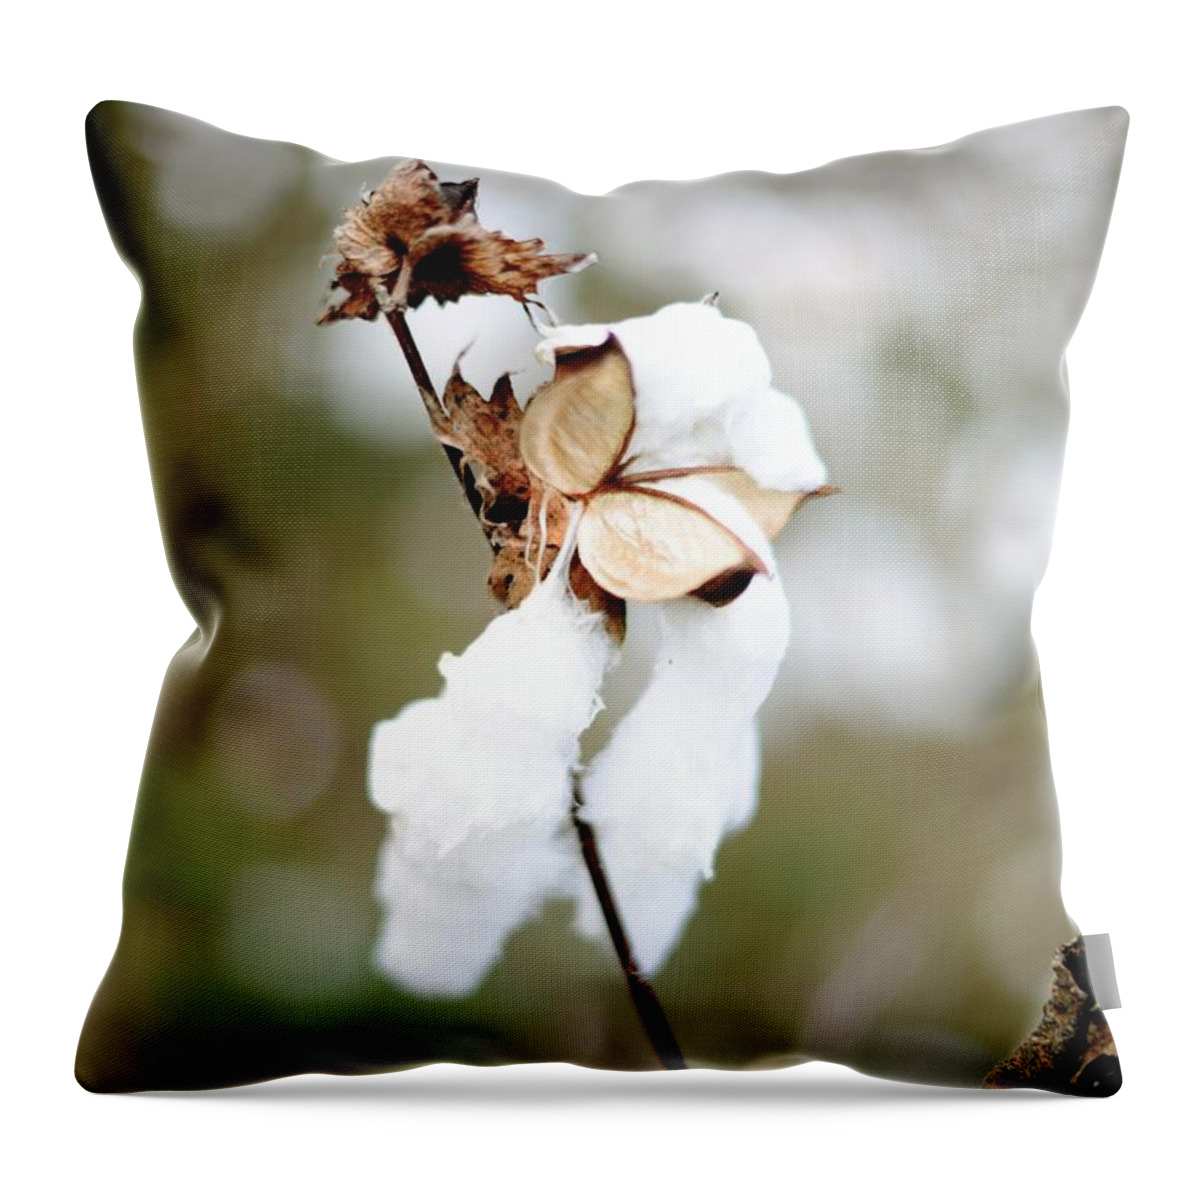 Cotton Throw Pillow featuring the photograph Cotton Picking by Linda Mishler